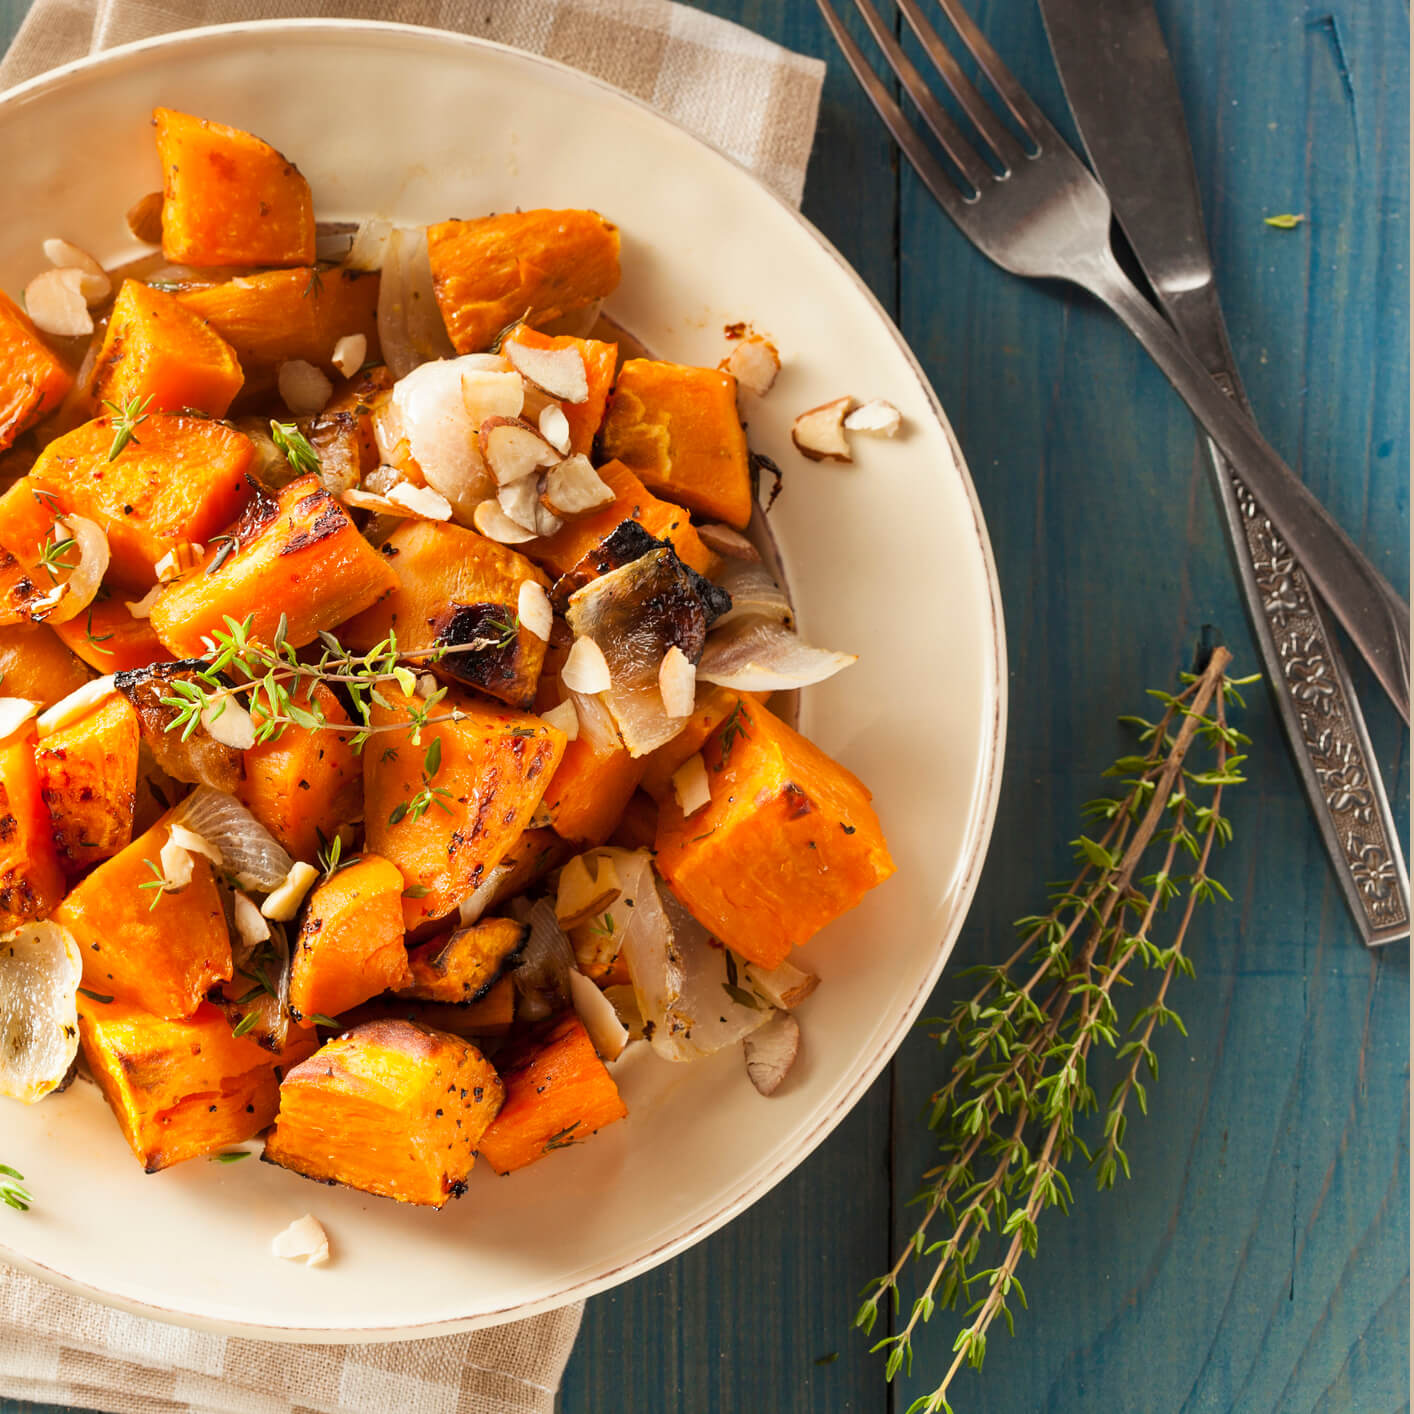 Sweet potatoes can be served as a side dish or dessert.